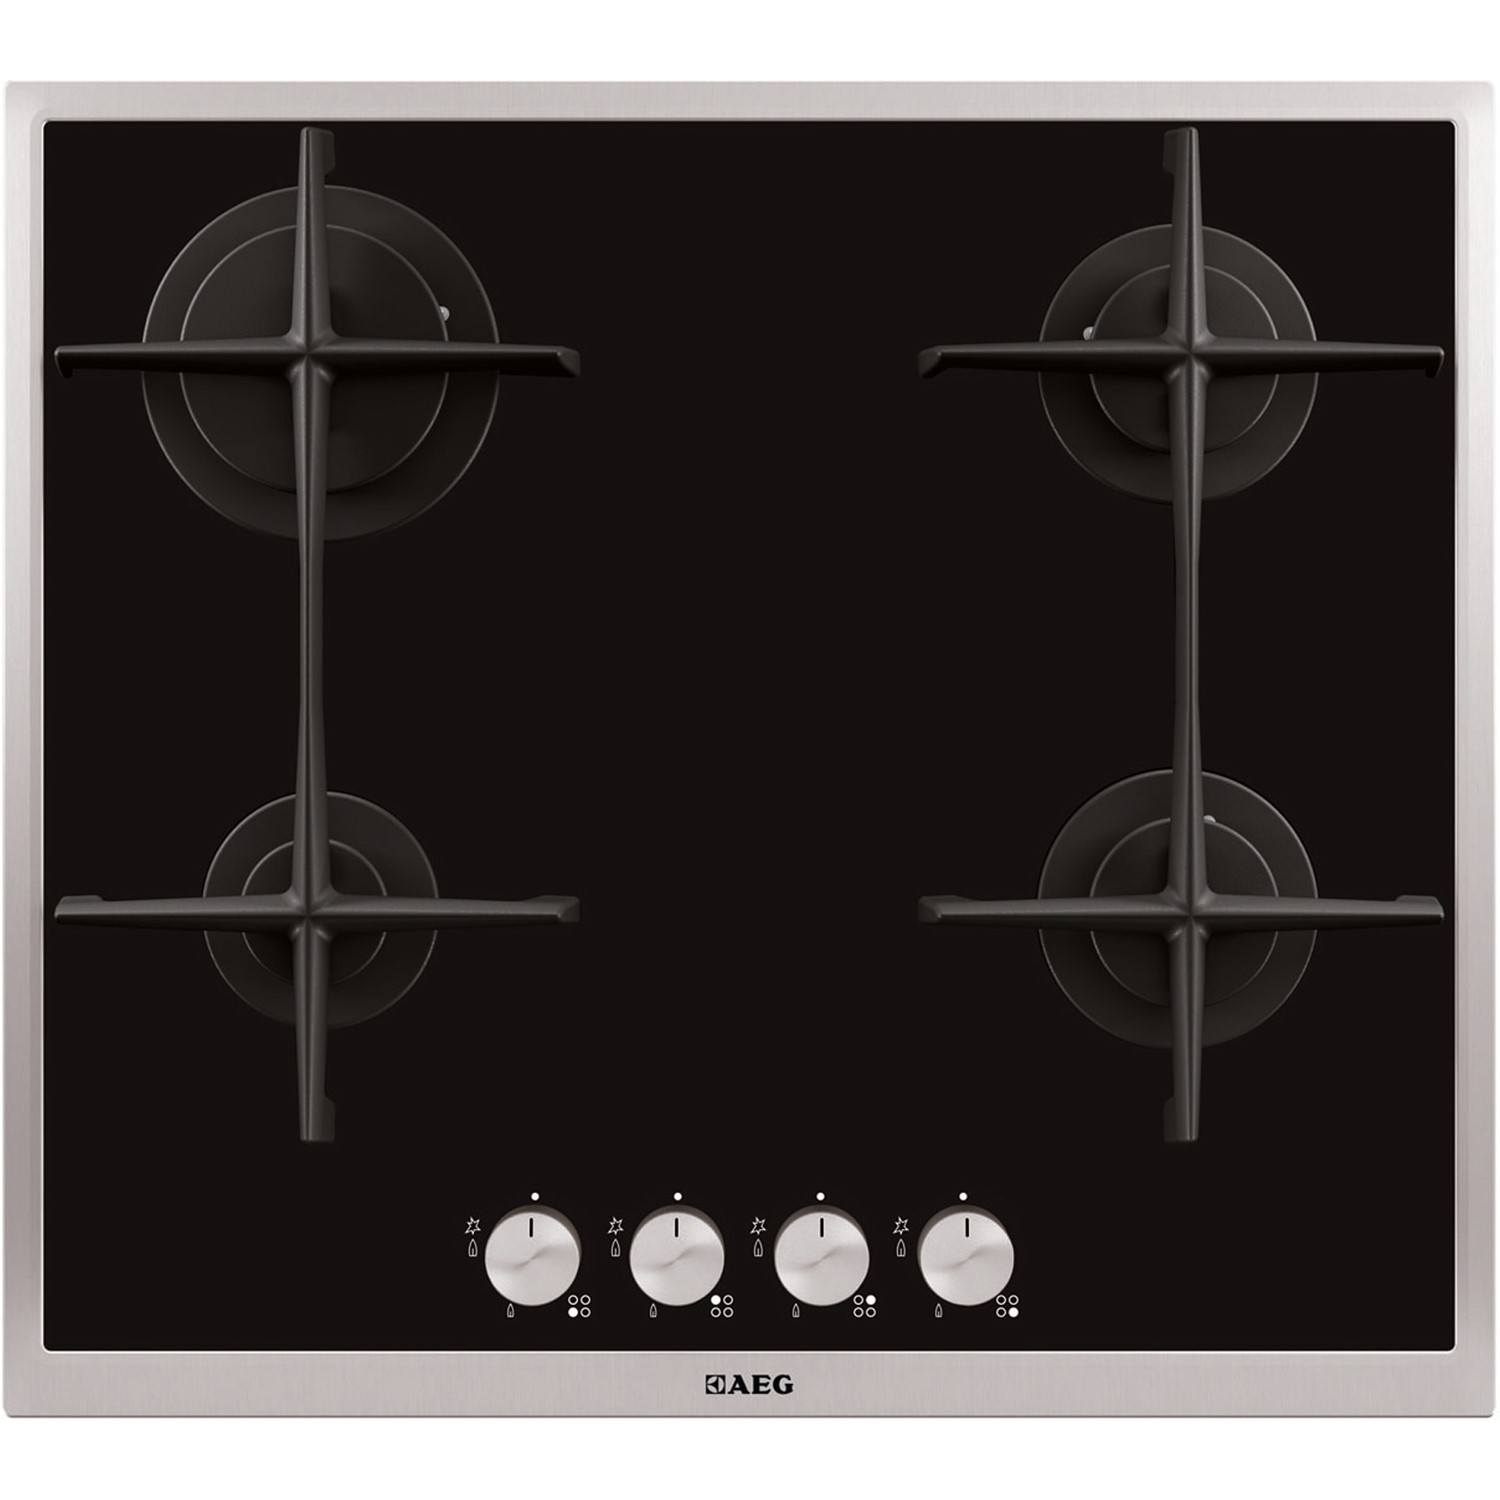 AEG HG694340XB 58cm Four Burner Gas-on-glass Hob With Stainless Steel Frame | Appliances Direct